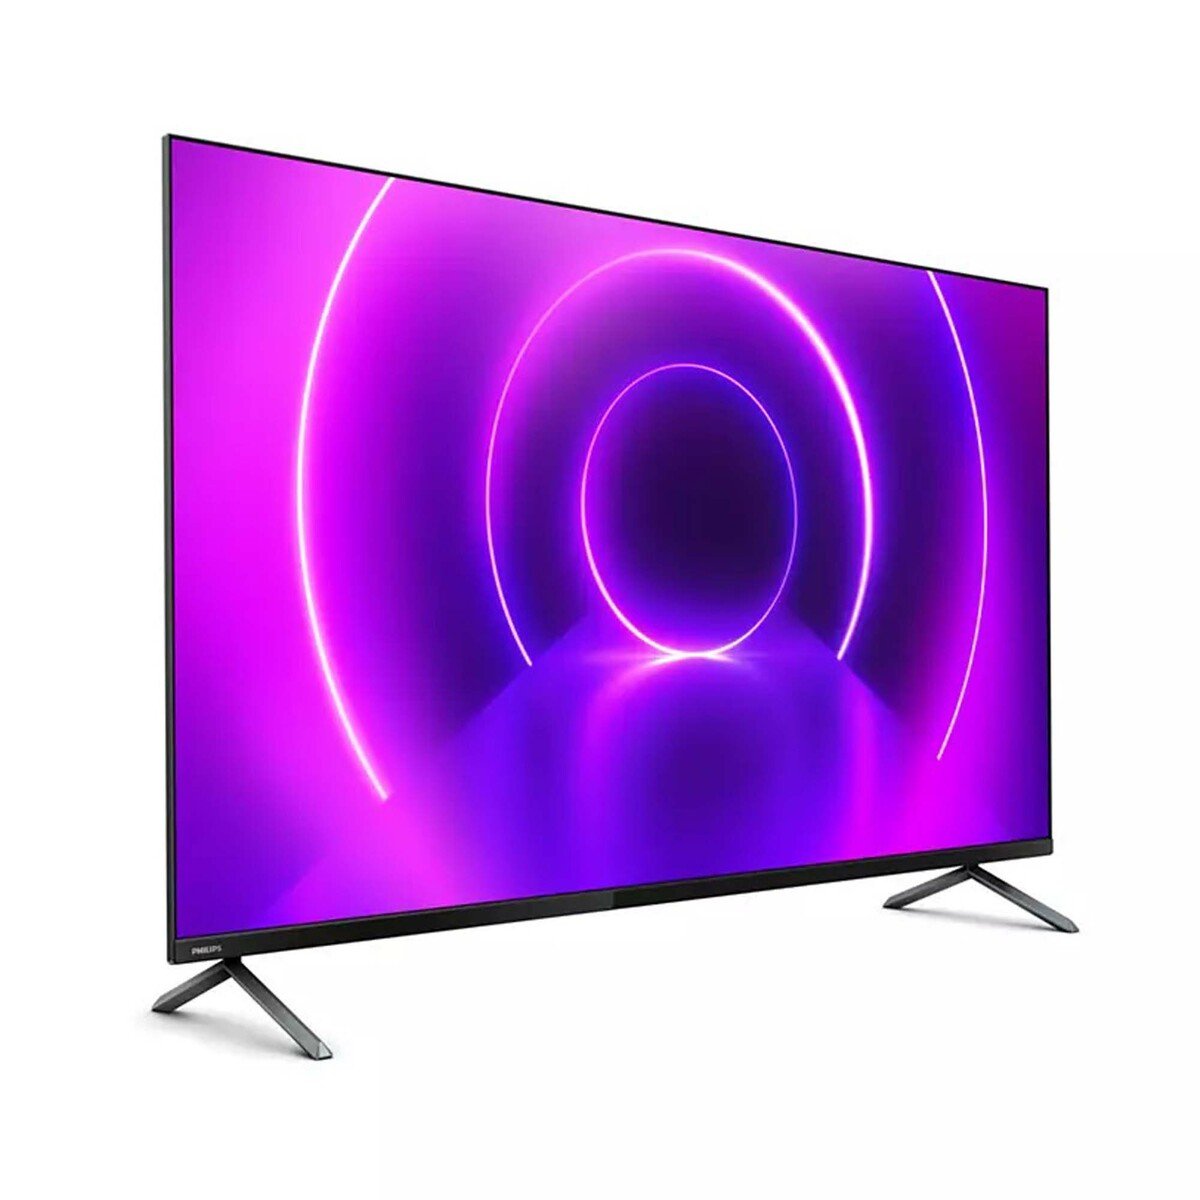 Philips 4K UltraHD Android Smart LED TV 55PUT8215 55inch